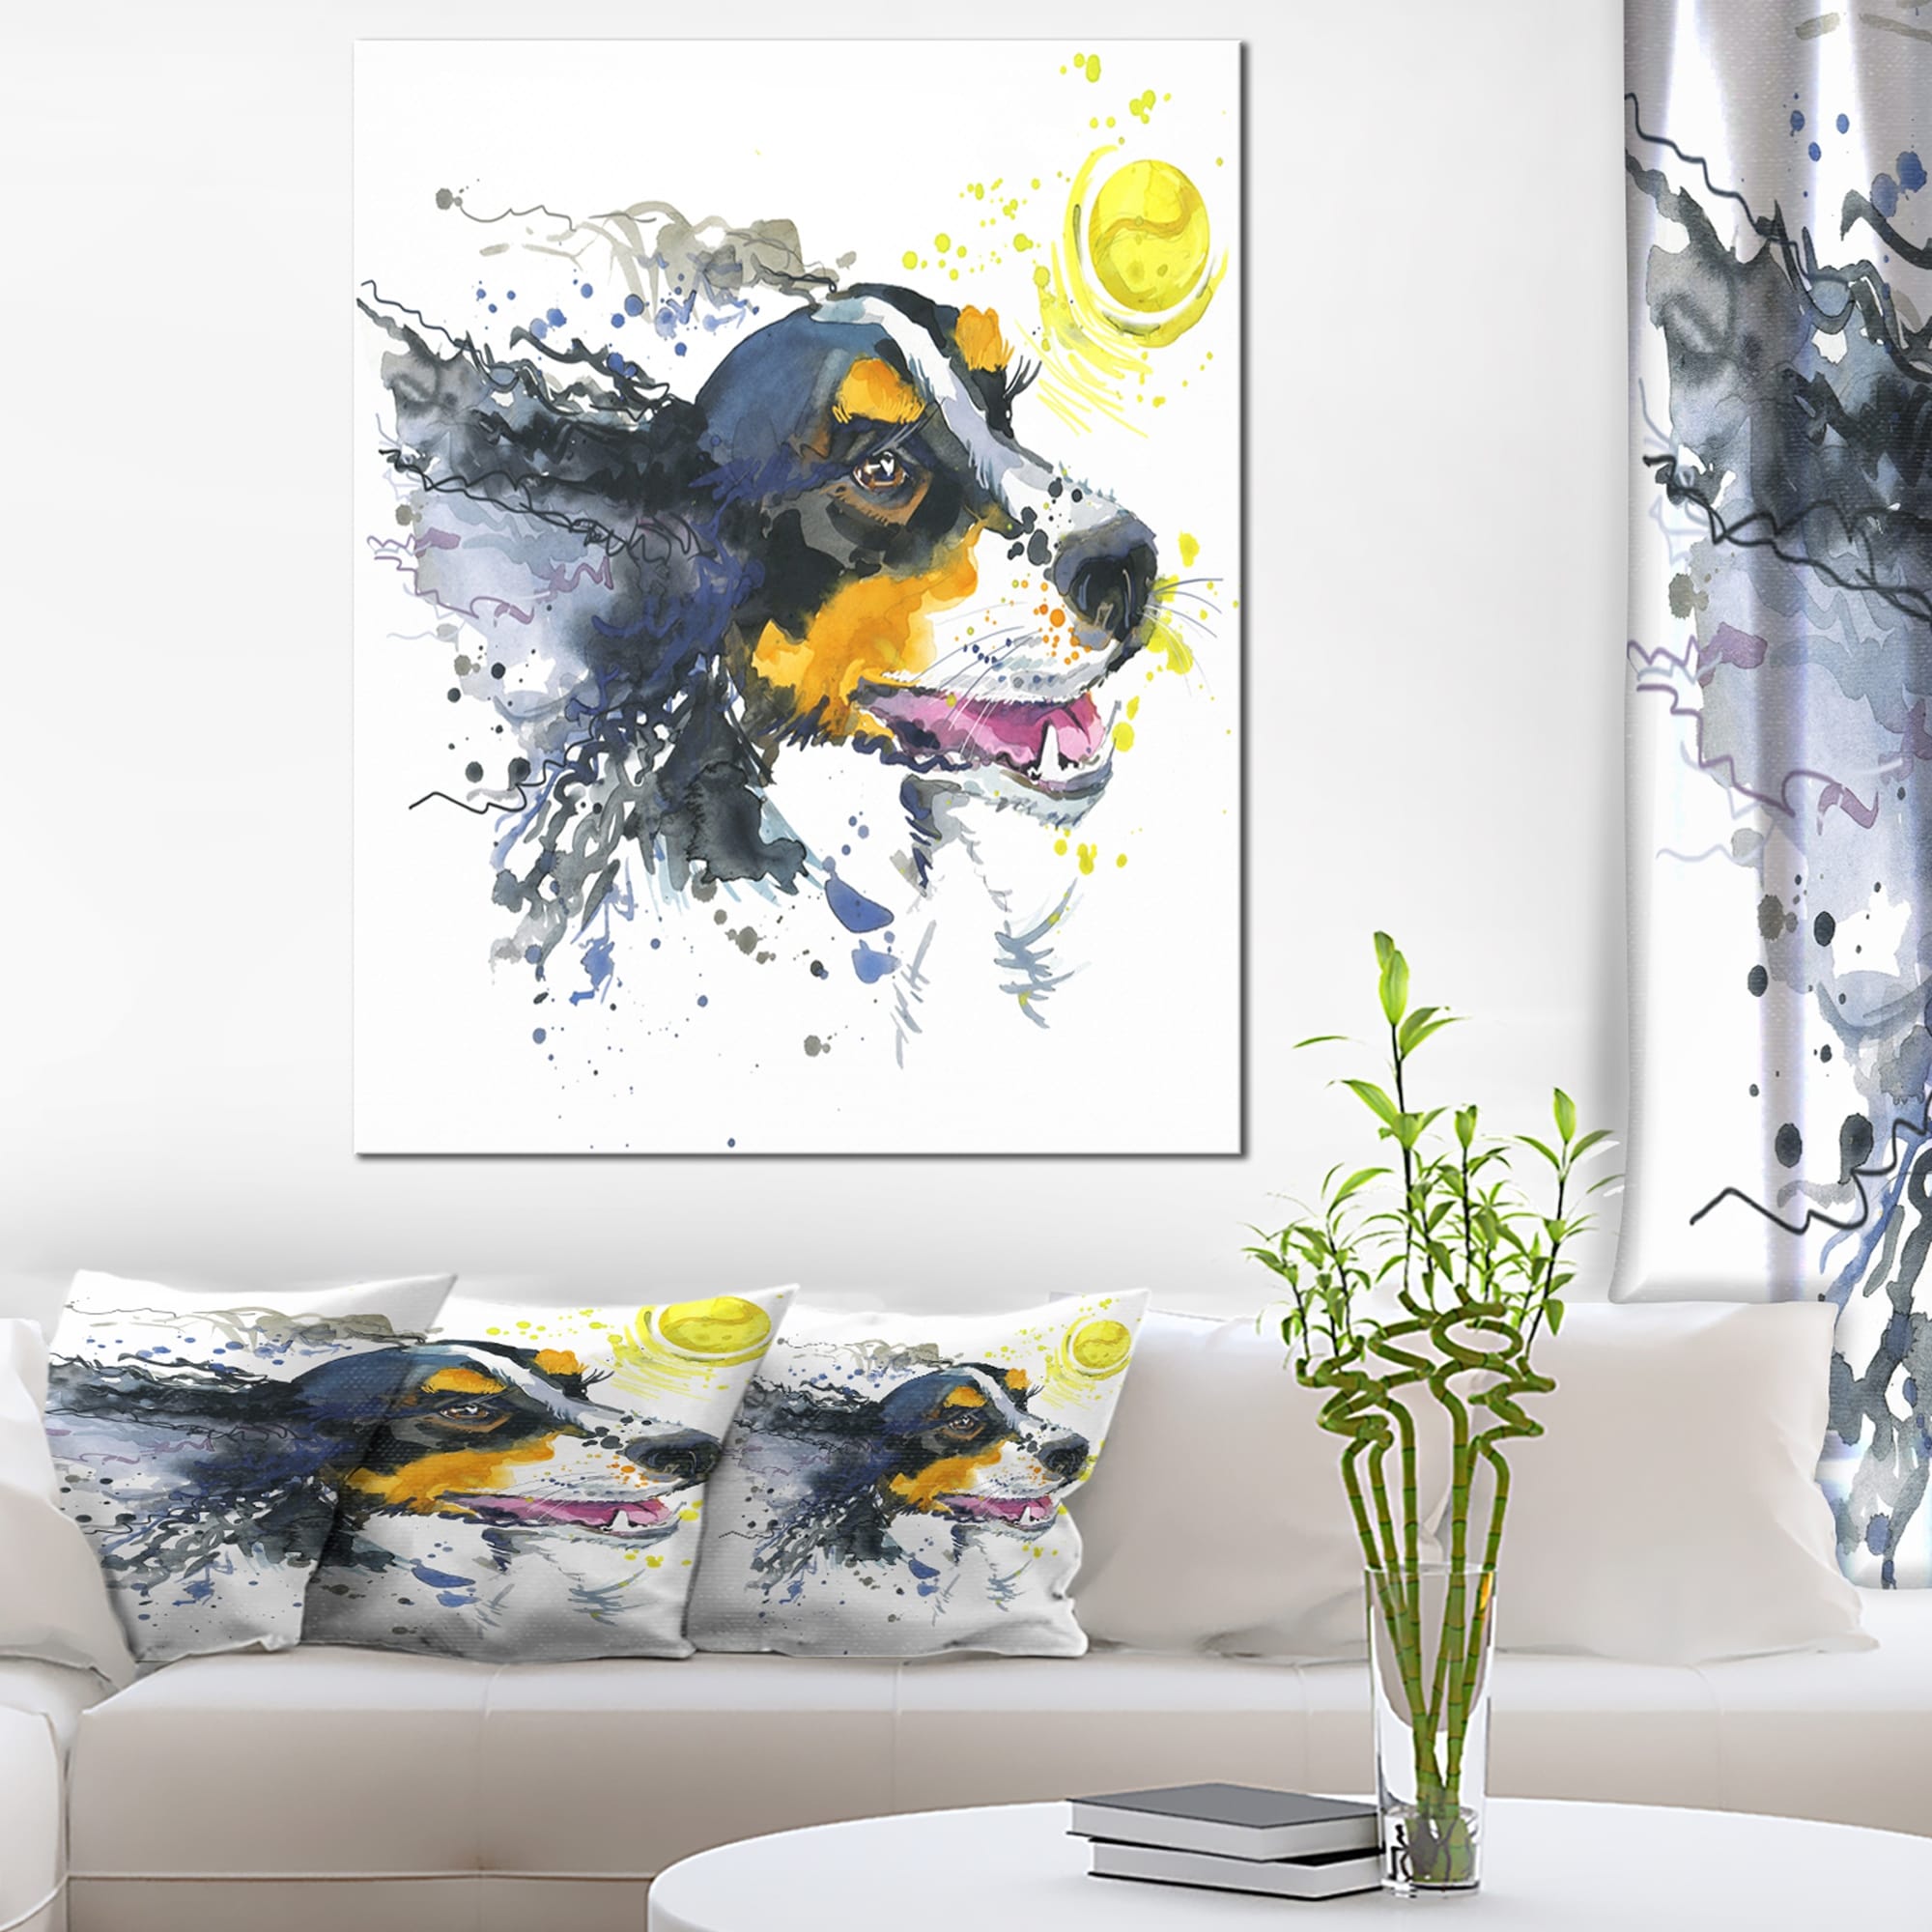 https://ak1.ostkcdn.com/images/products/is/images/direct/096605a280d8c1288ff8f0f30a5966c489ce32fb/Designart-%27Dog-and-Yellow-Ball-Watercolor%27-Abstract-Canvas-Art-Print.jpg